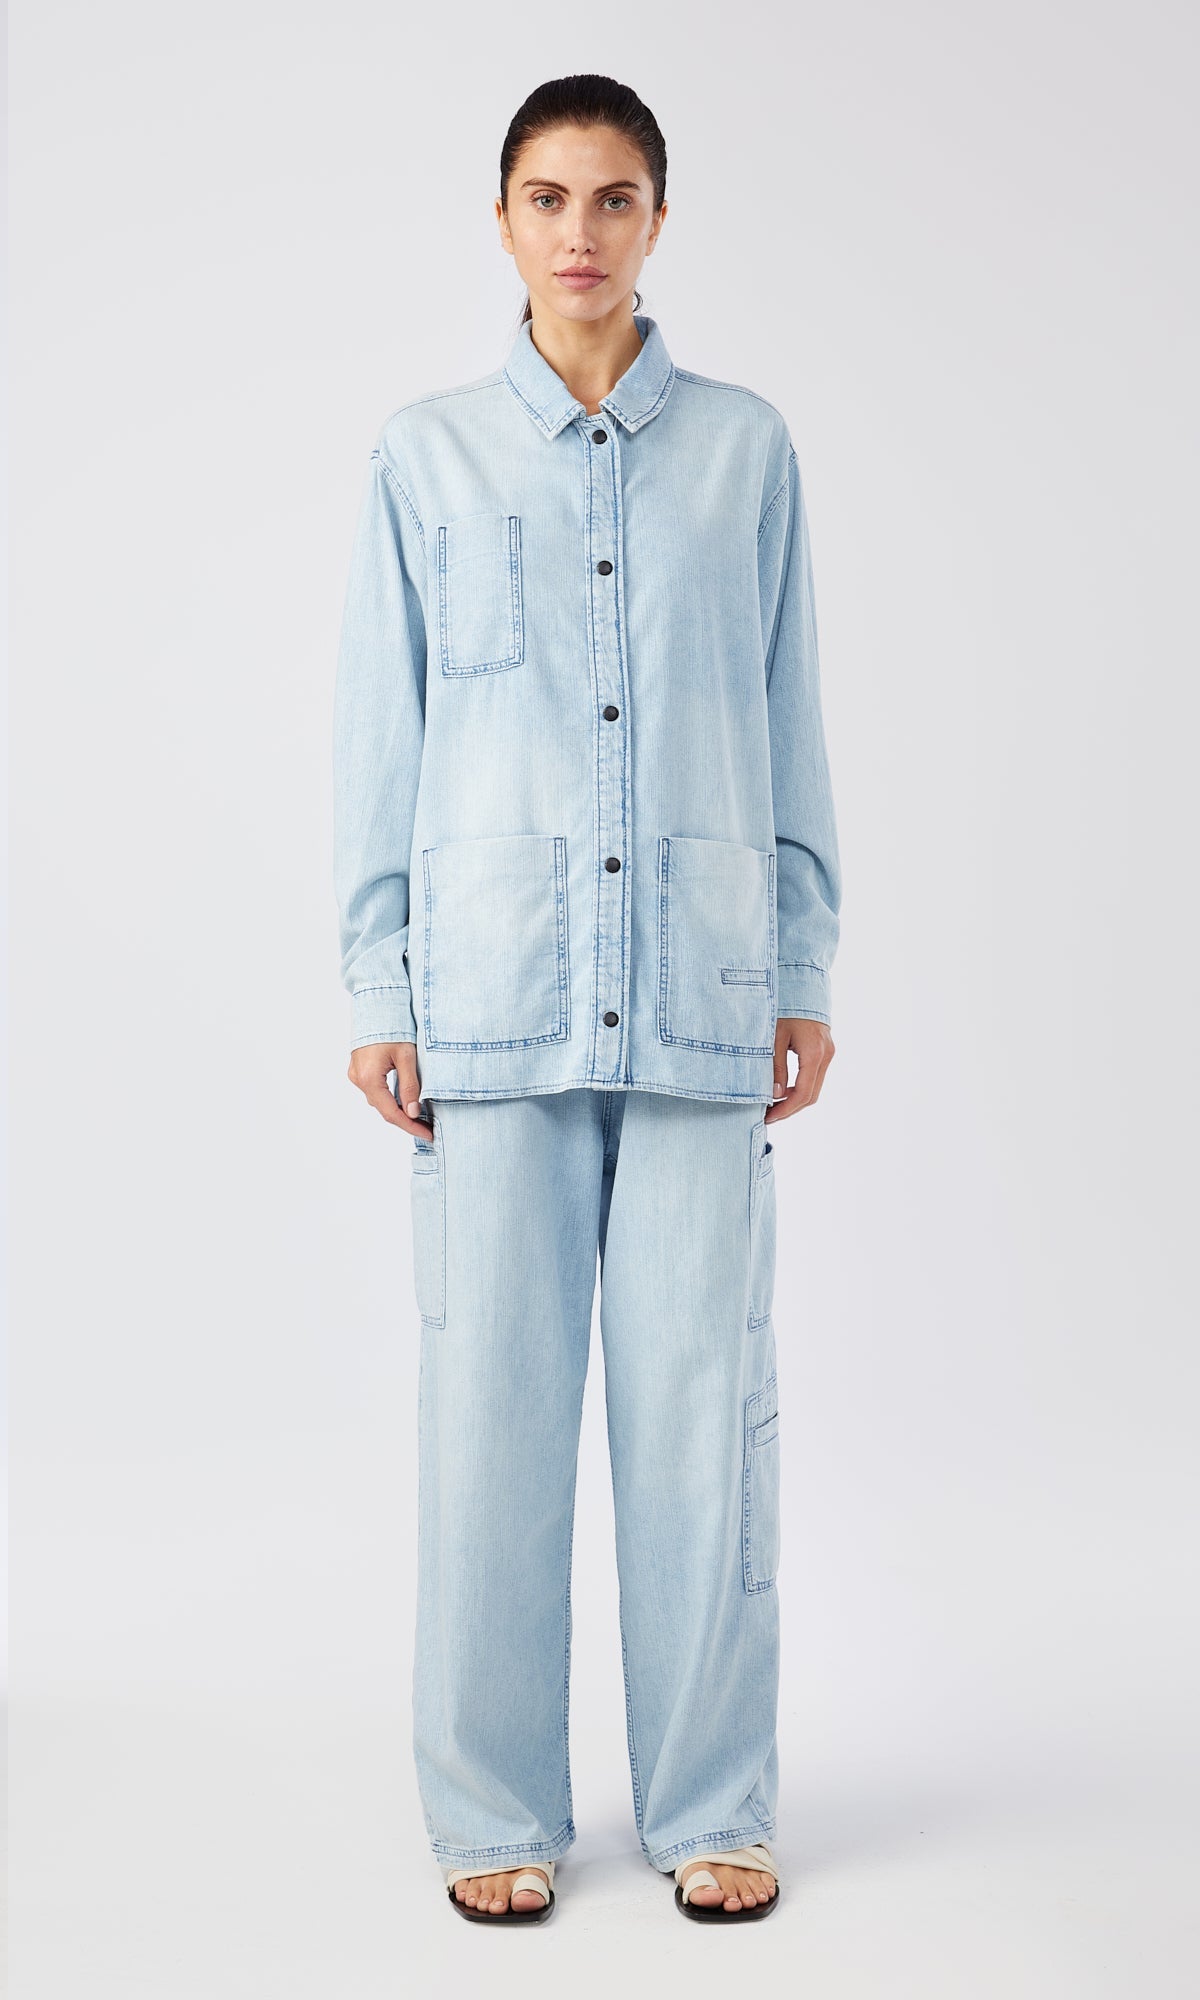 Ms. Campbell Oversized Cargo Shirt